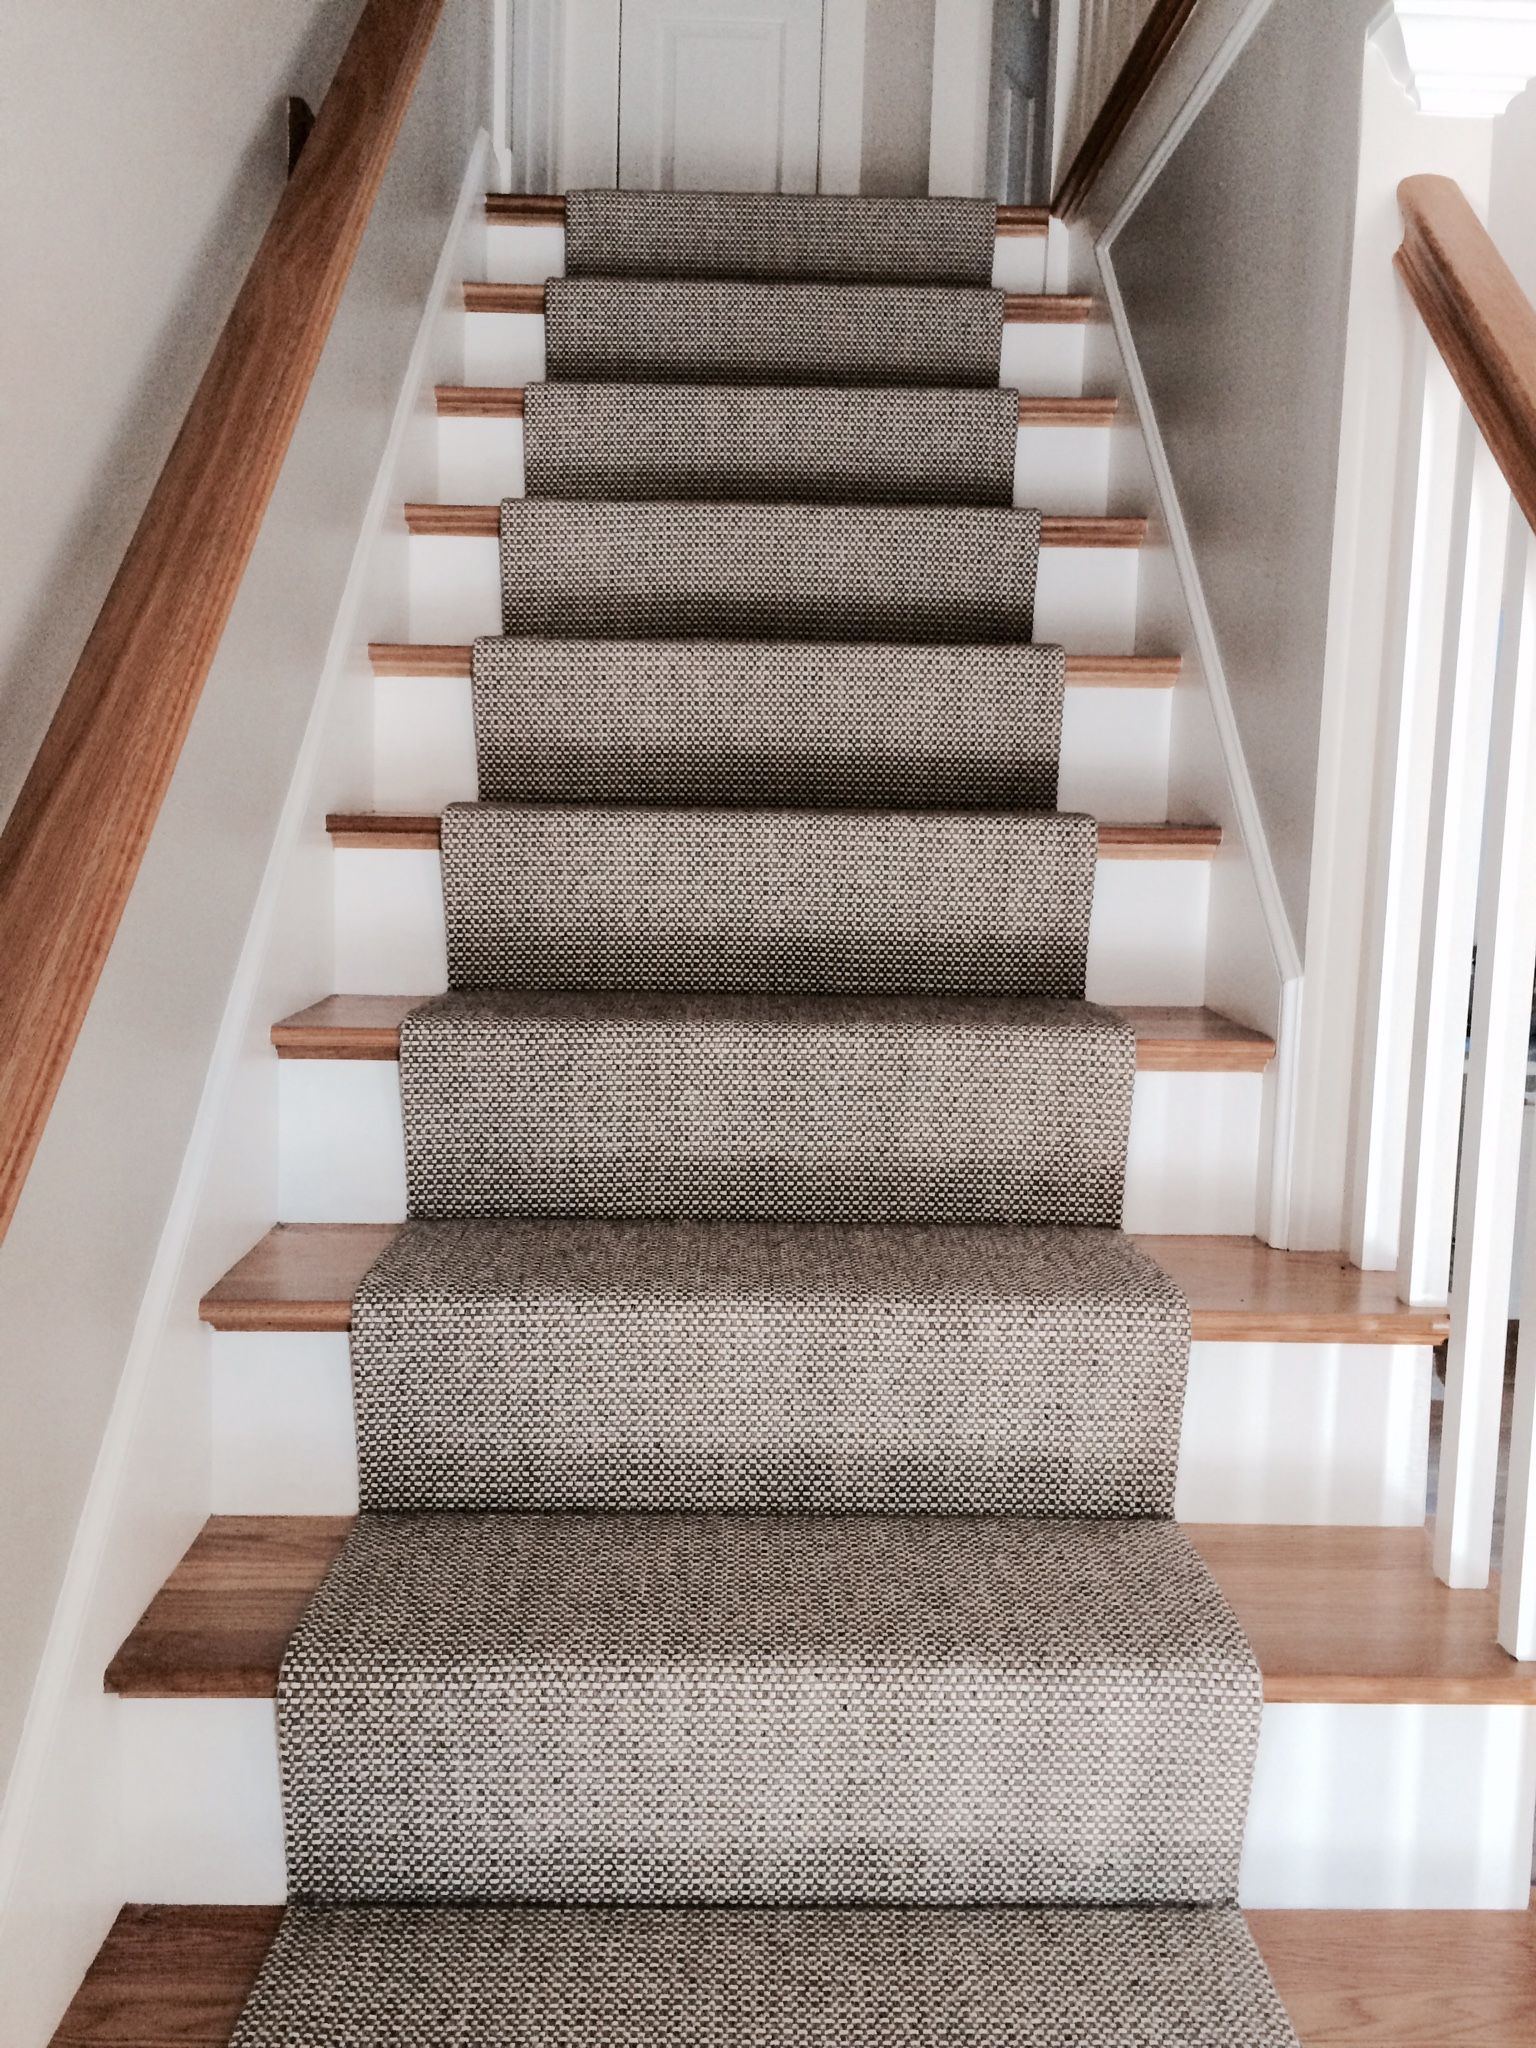 Carpet stairs woven wool stair runner that we fabricated using a fold and stitch method PJXPADP